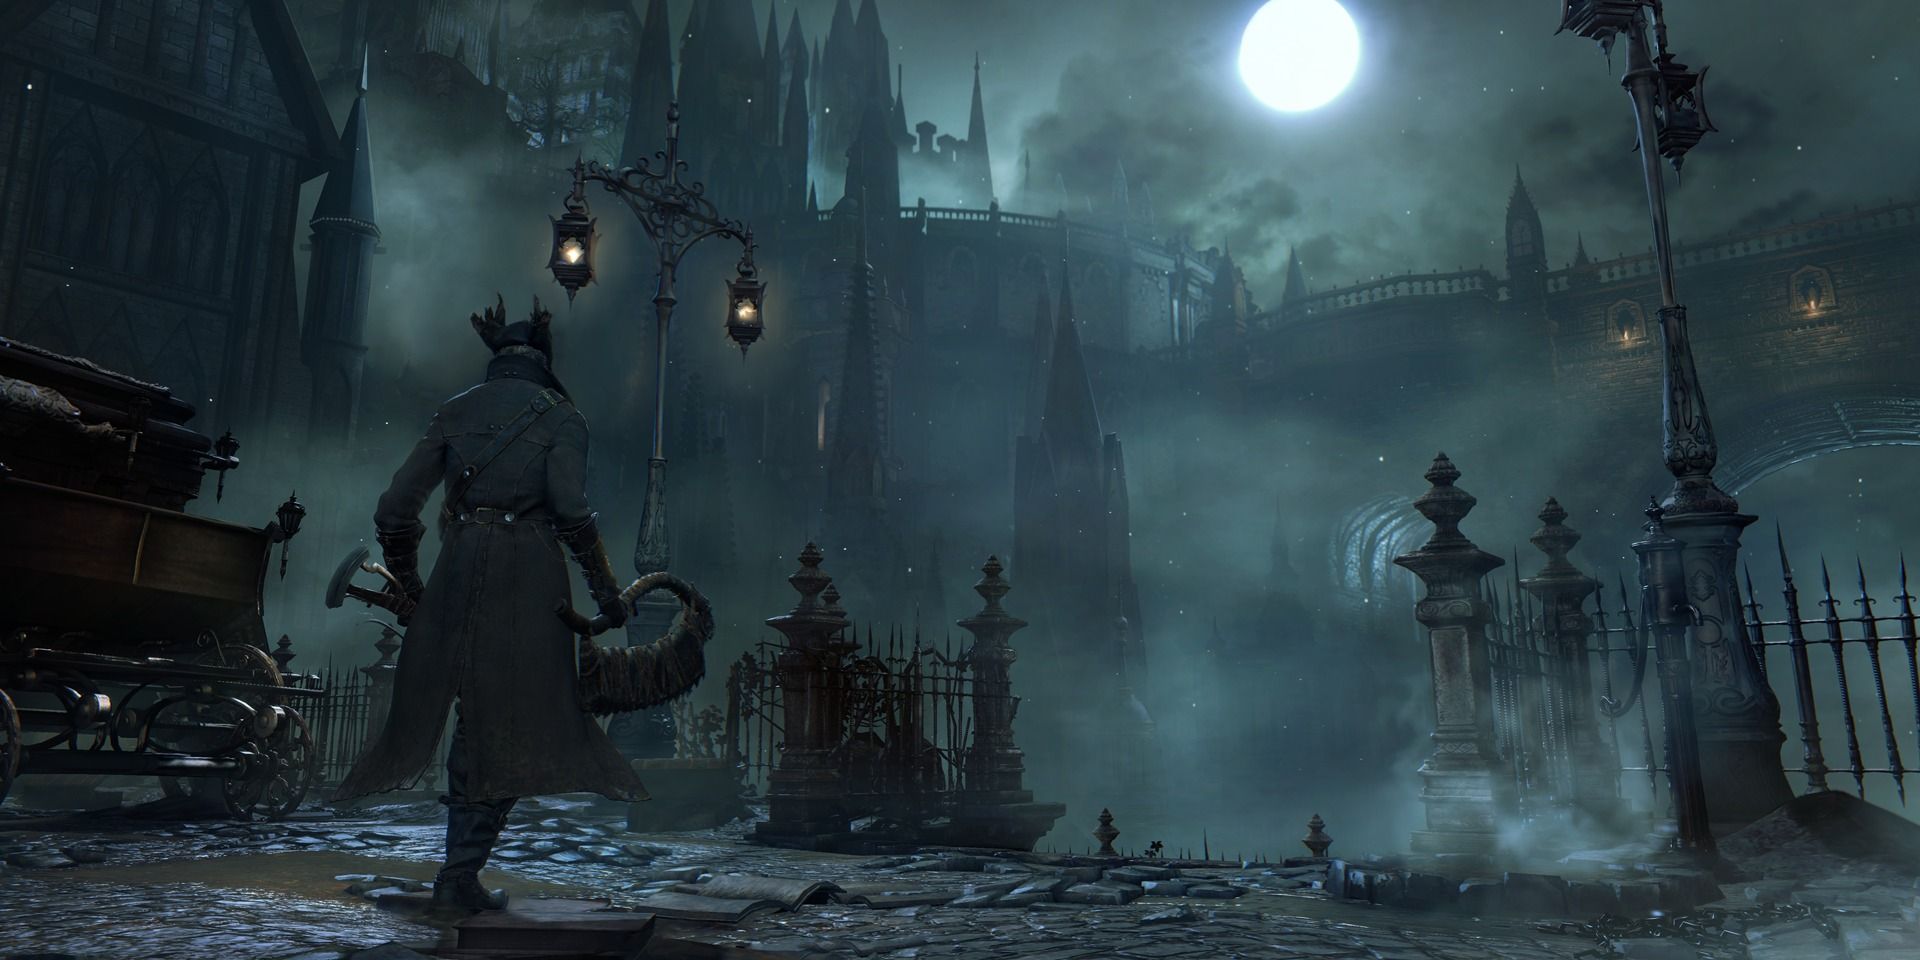 A screenshot showing the Hunter walking the moonlit streets of Yharnam in Bloodborne